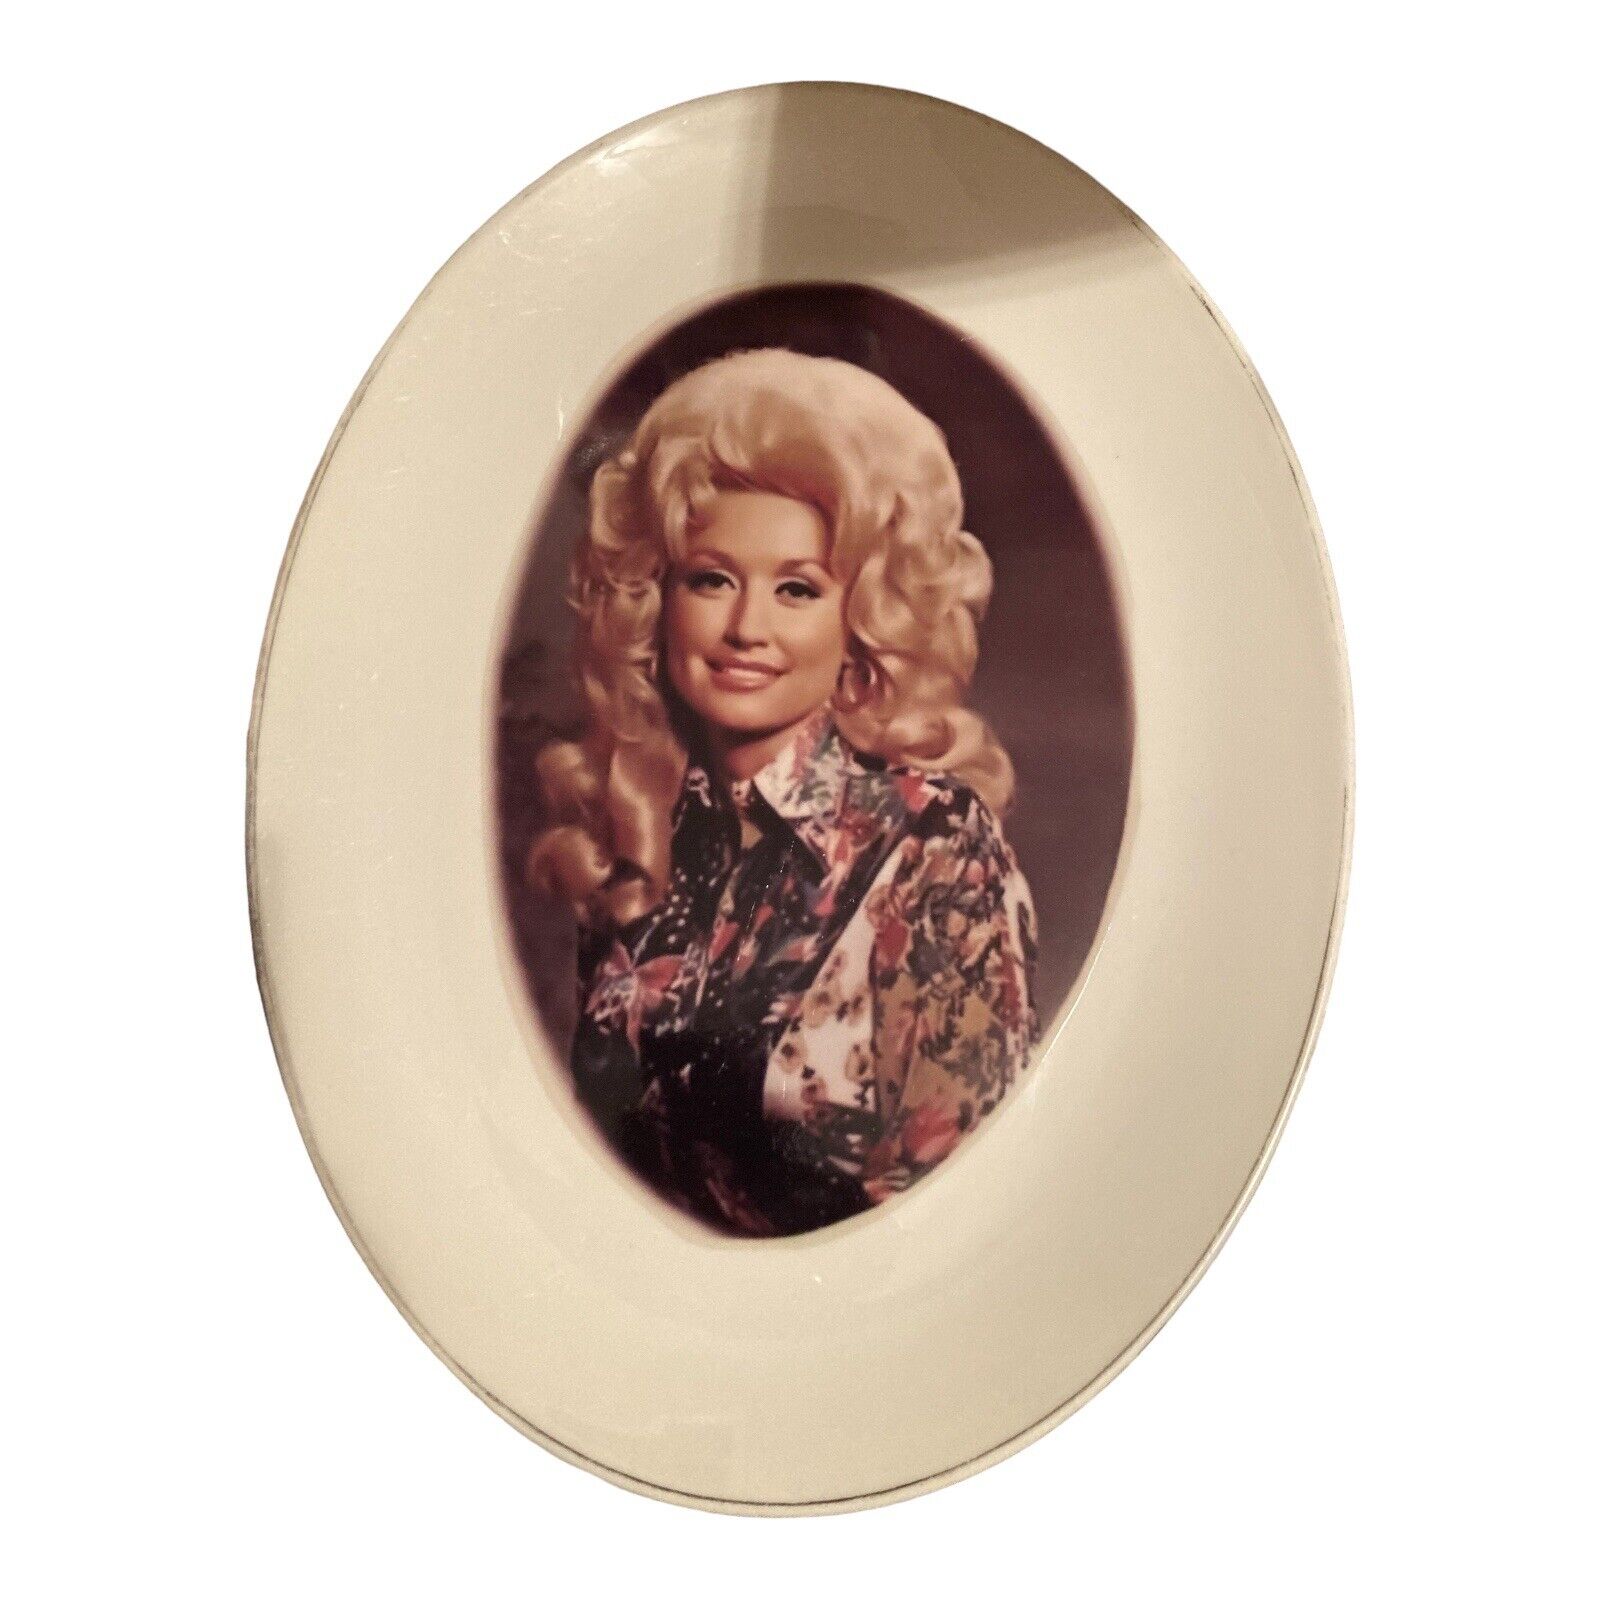 VERY RARE DOLLY PARTON Plate Early Dollywood Offering??  Only One On eBay